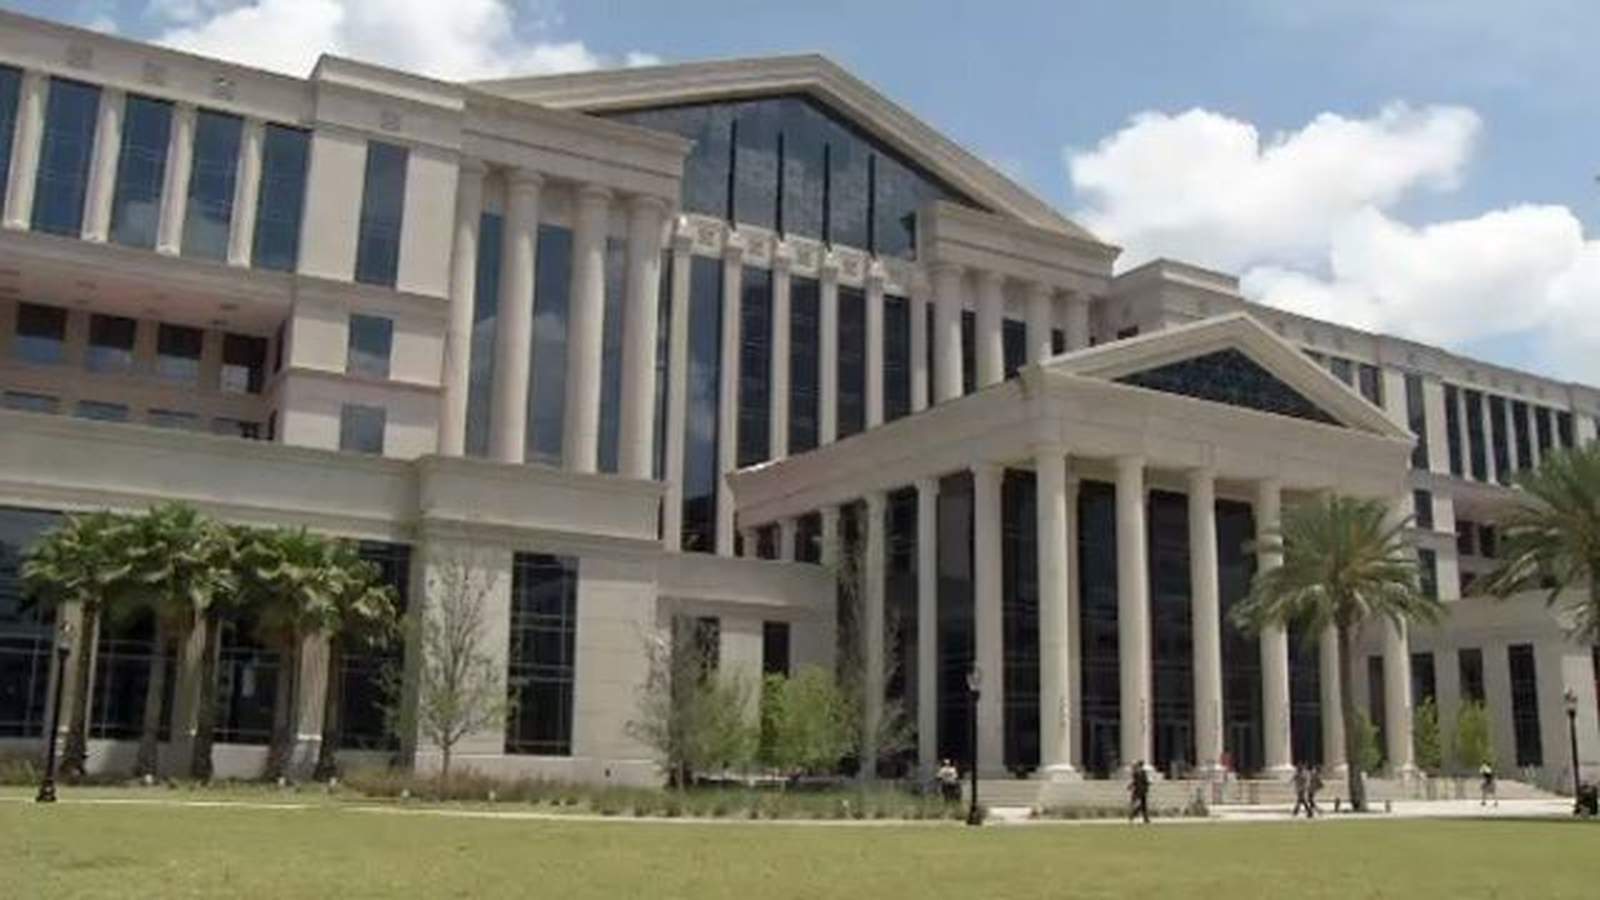 Jury trials resume in Duval County with new safety measures in place